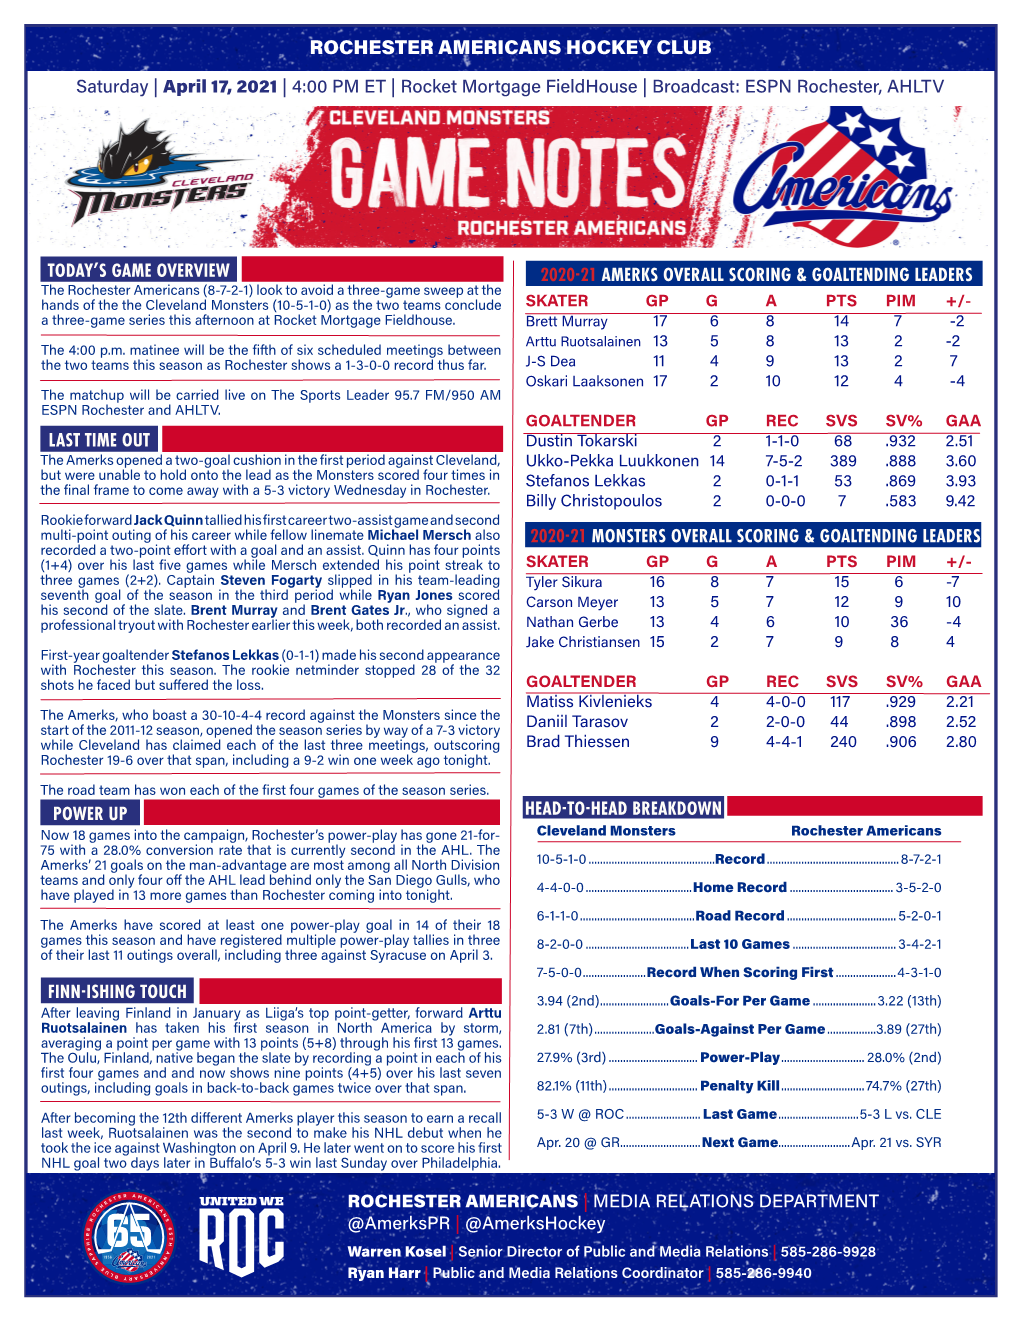 Rochester Americans Hockey Club Today's Game Overview Head-To-Head Breakdown Finn-Ishing Touch 2020-21 Amerks Overall Scoring